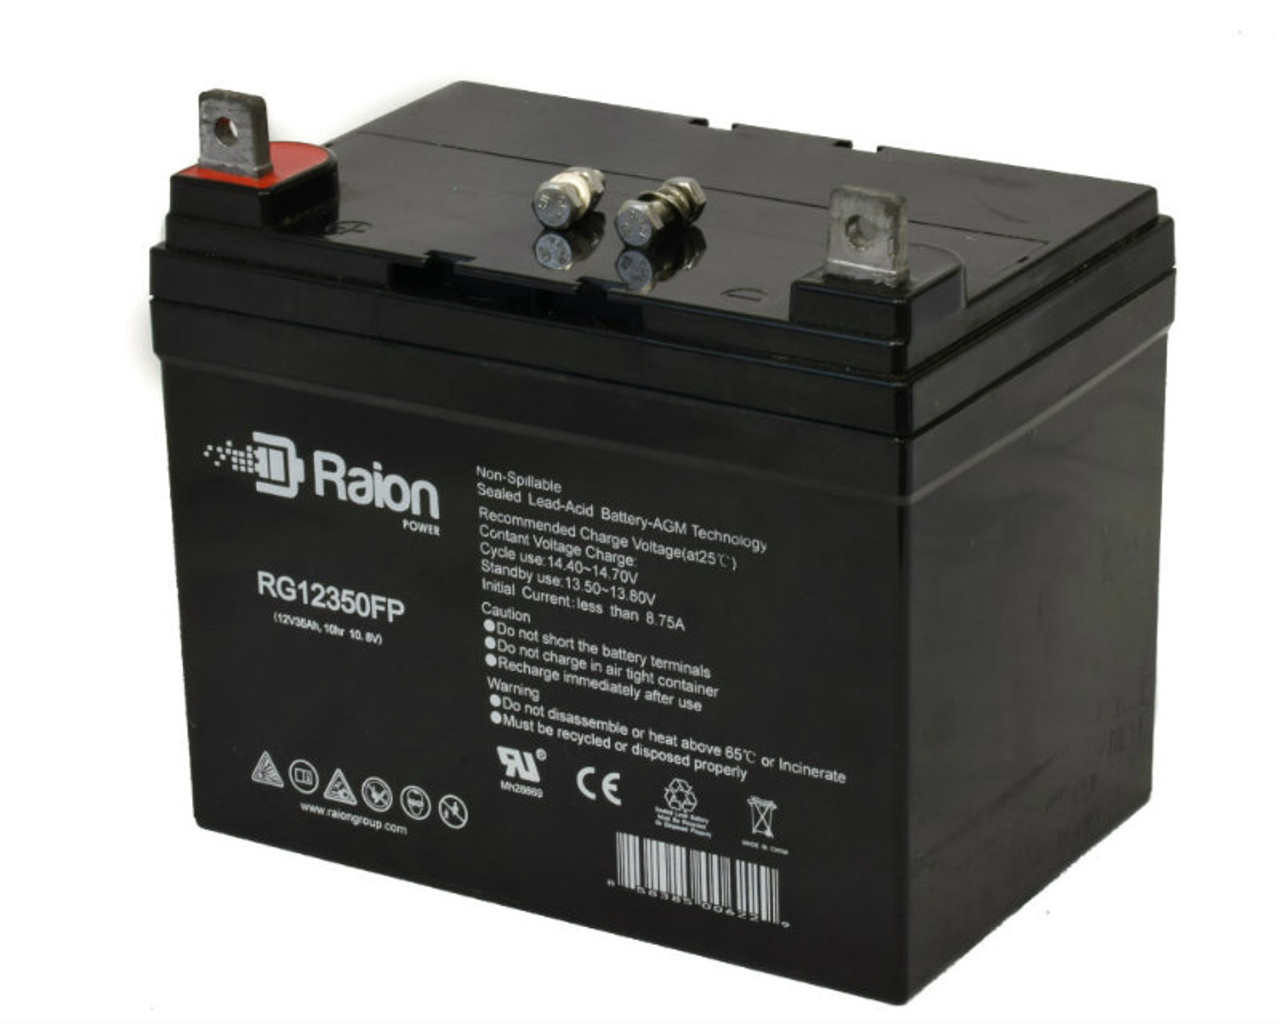 Raion Power Replacement 12V 35Ah Battery for J.I. Case & Case Ih Lawn 646 - 1 Pack